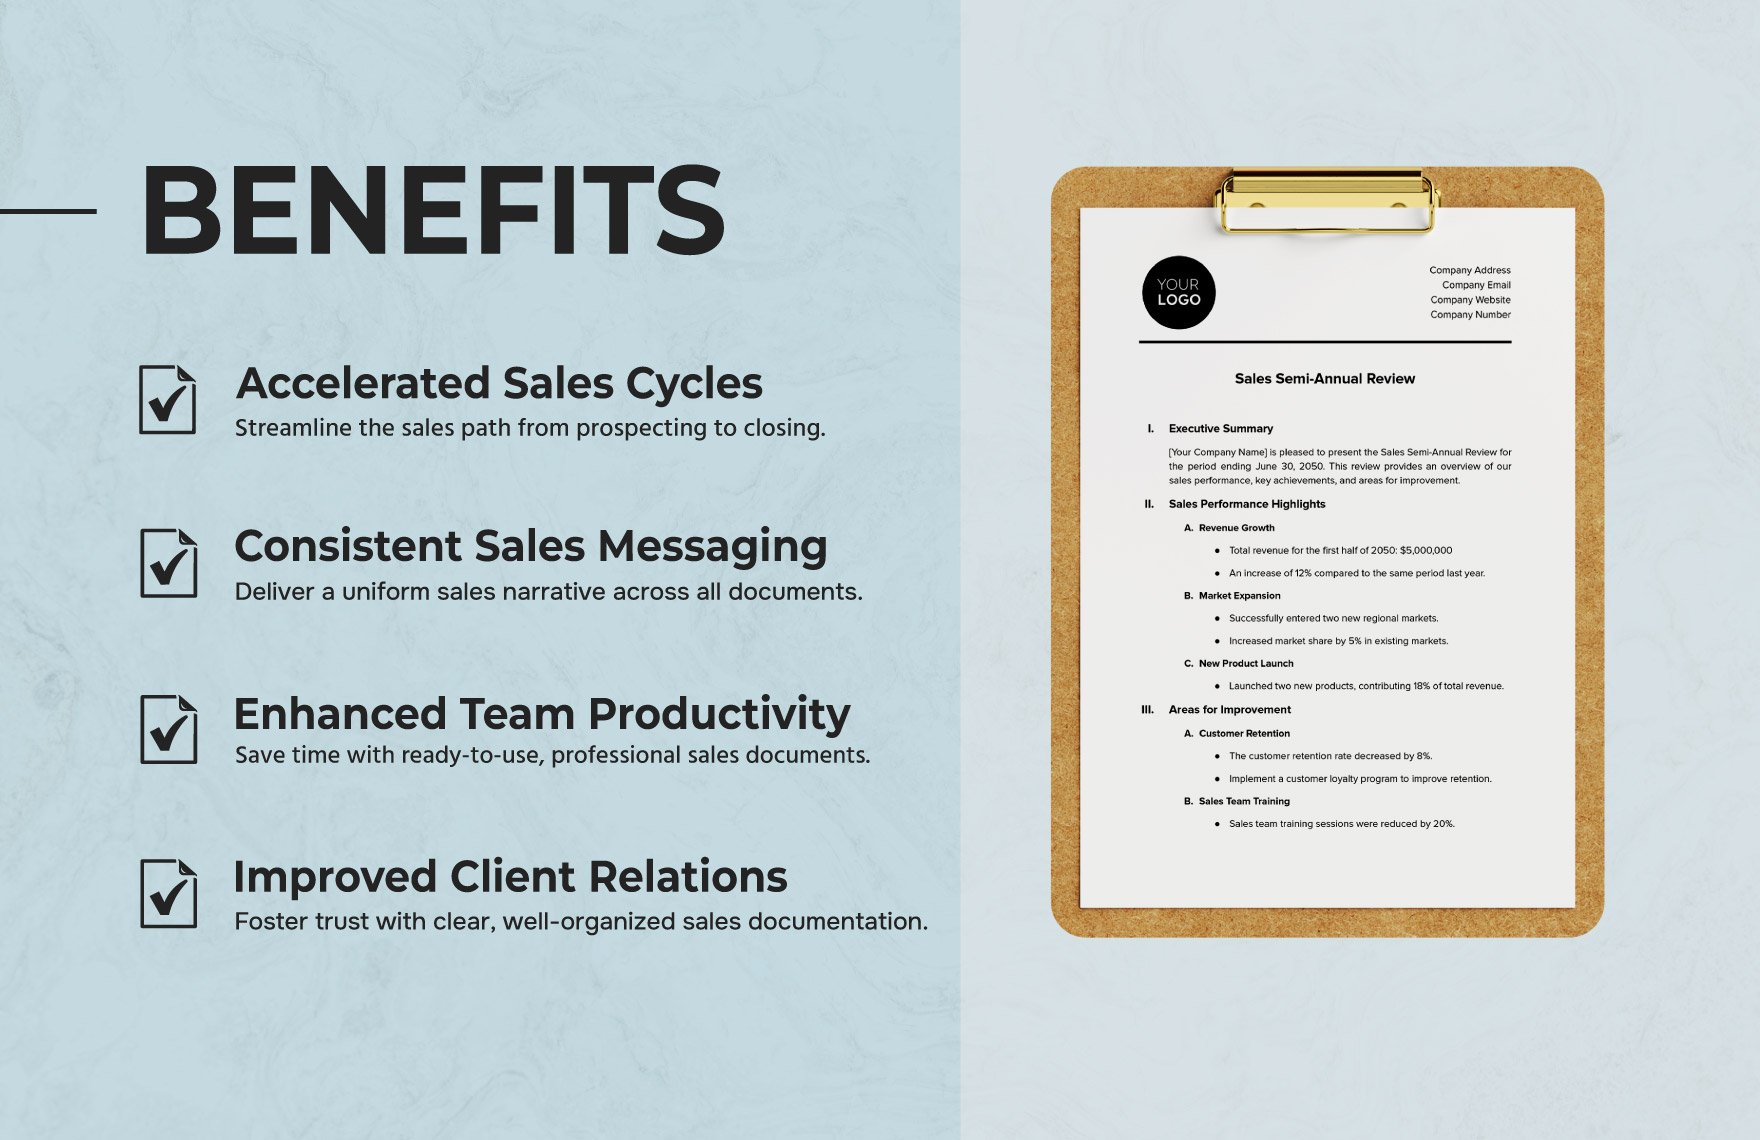 Sales Semi-Annual Review Template